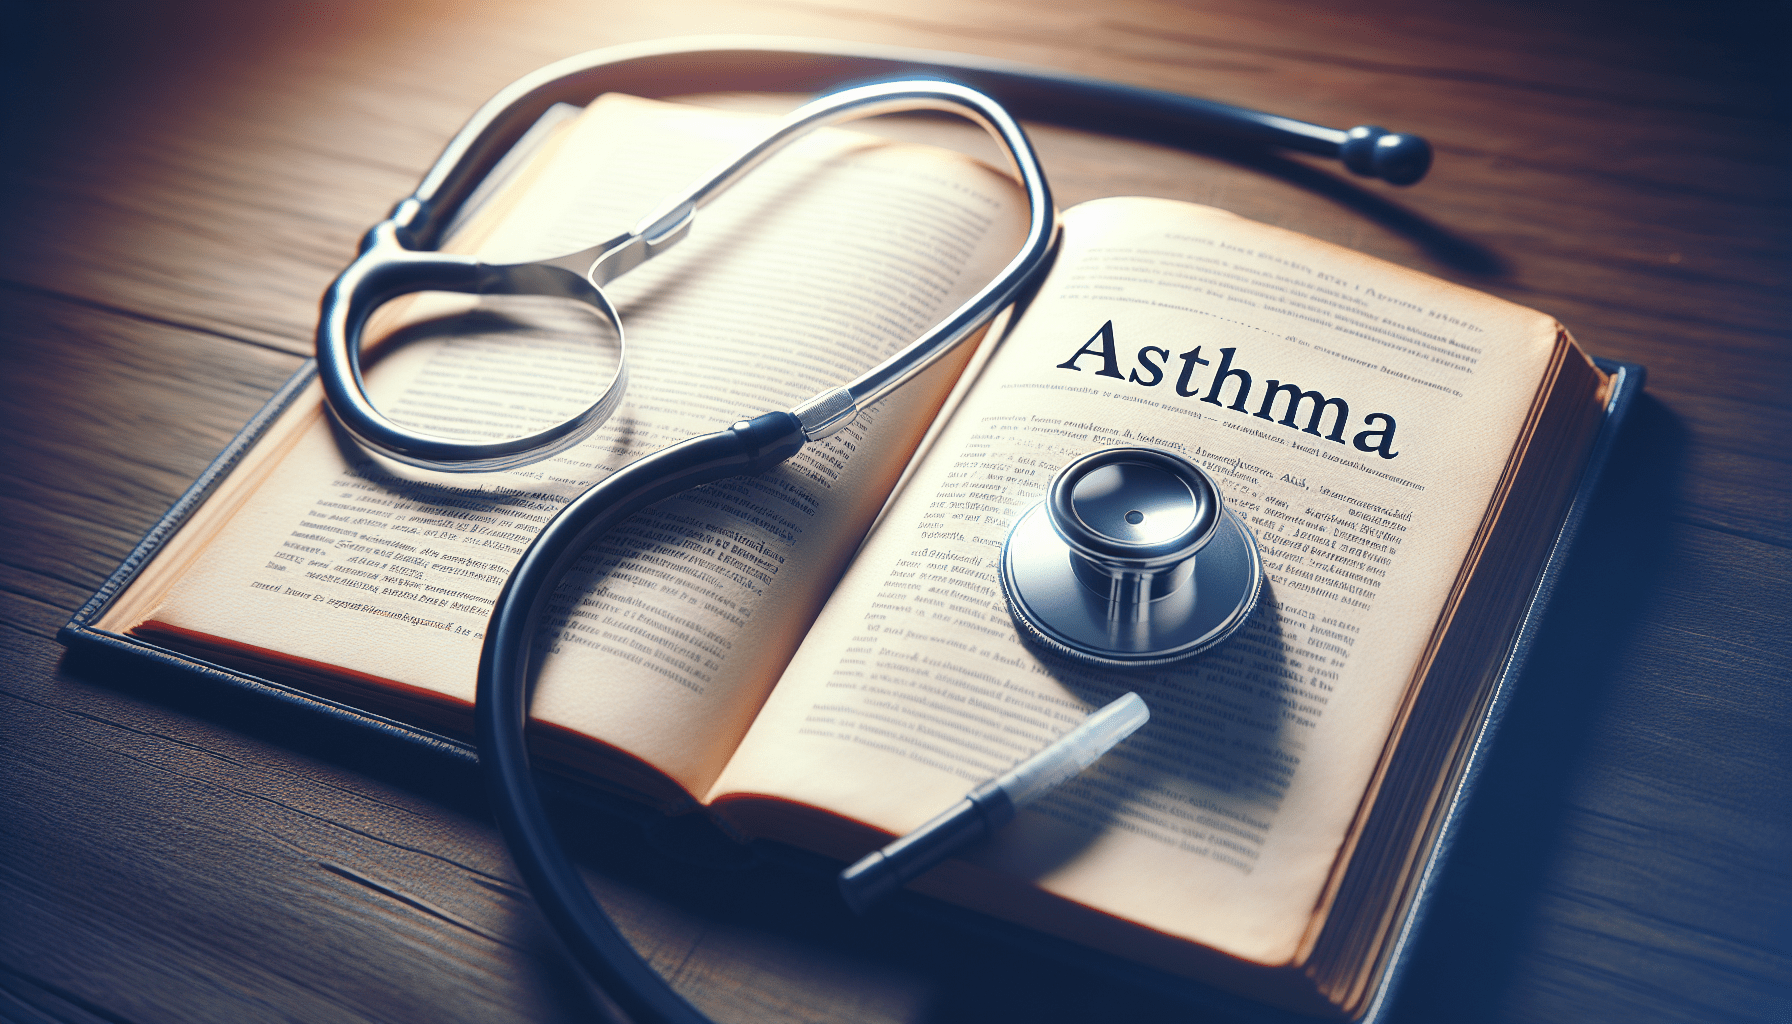 Can Asthma Clear Up On Its Own?